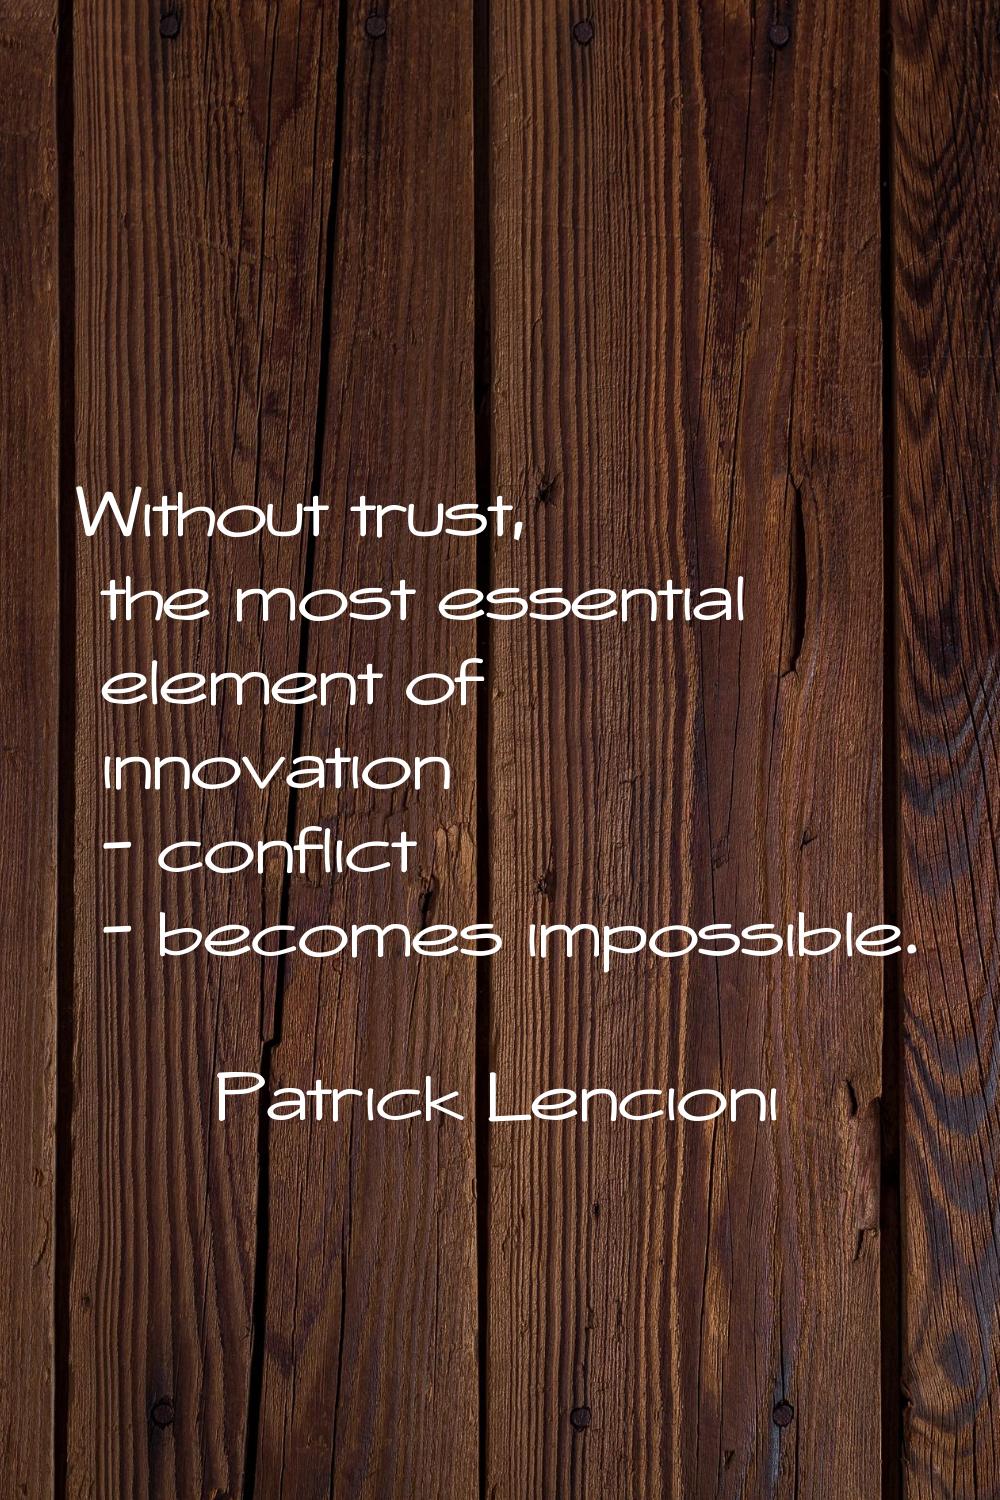 Without trust, the most essential element of innovation - conflict - becomes impossible.